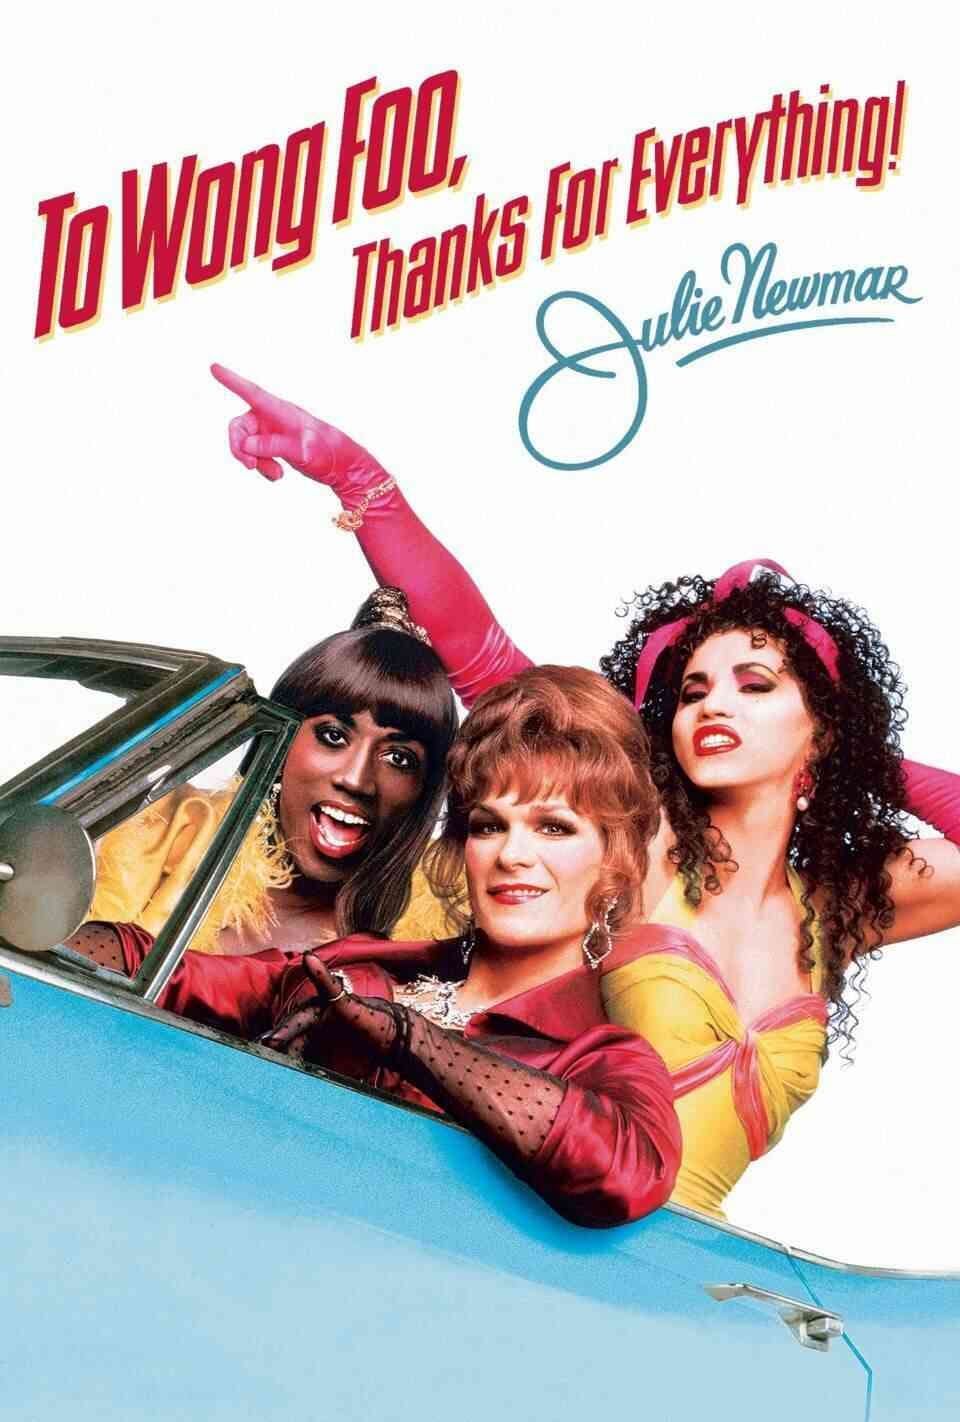 Read To Wong Foo, Thanks for Everything! Julie Newmar screenplay (poster)